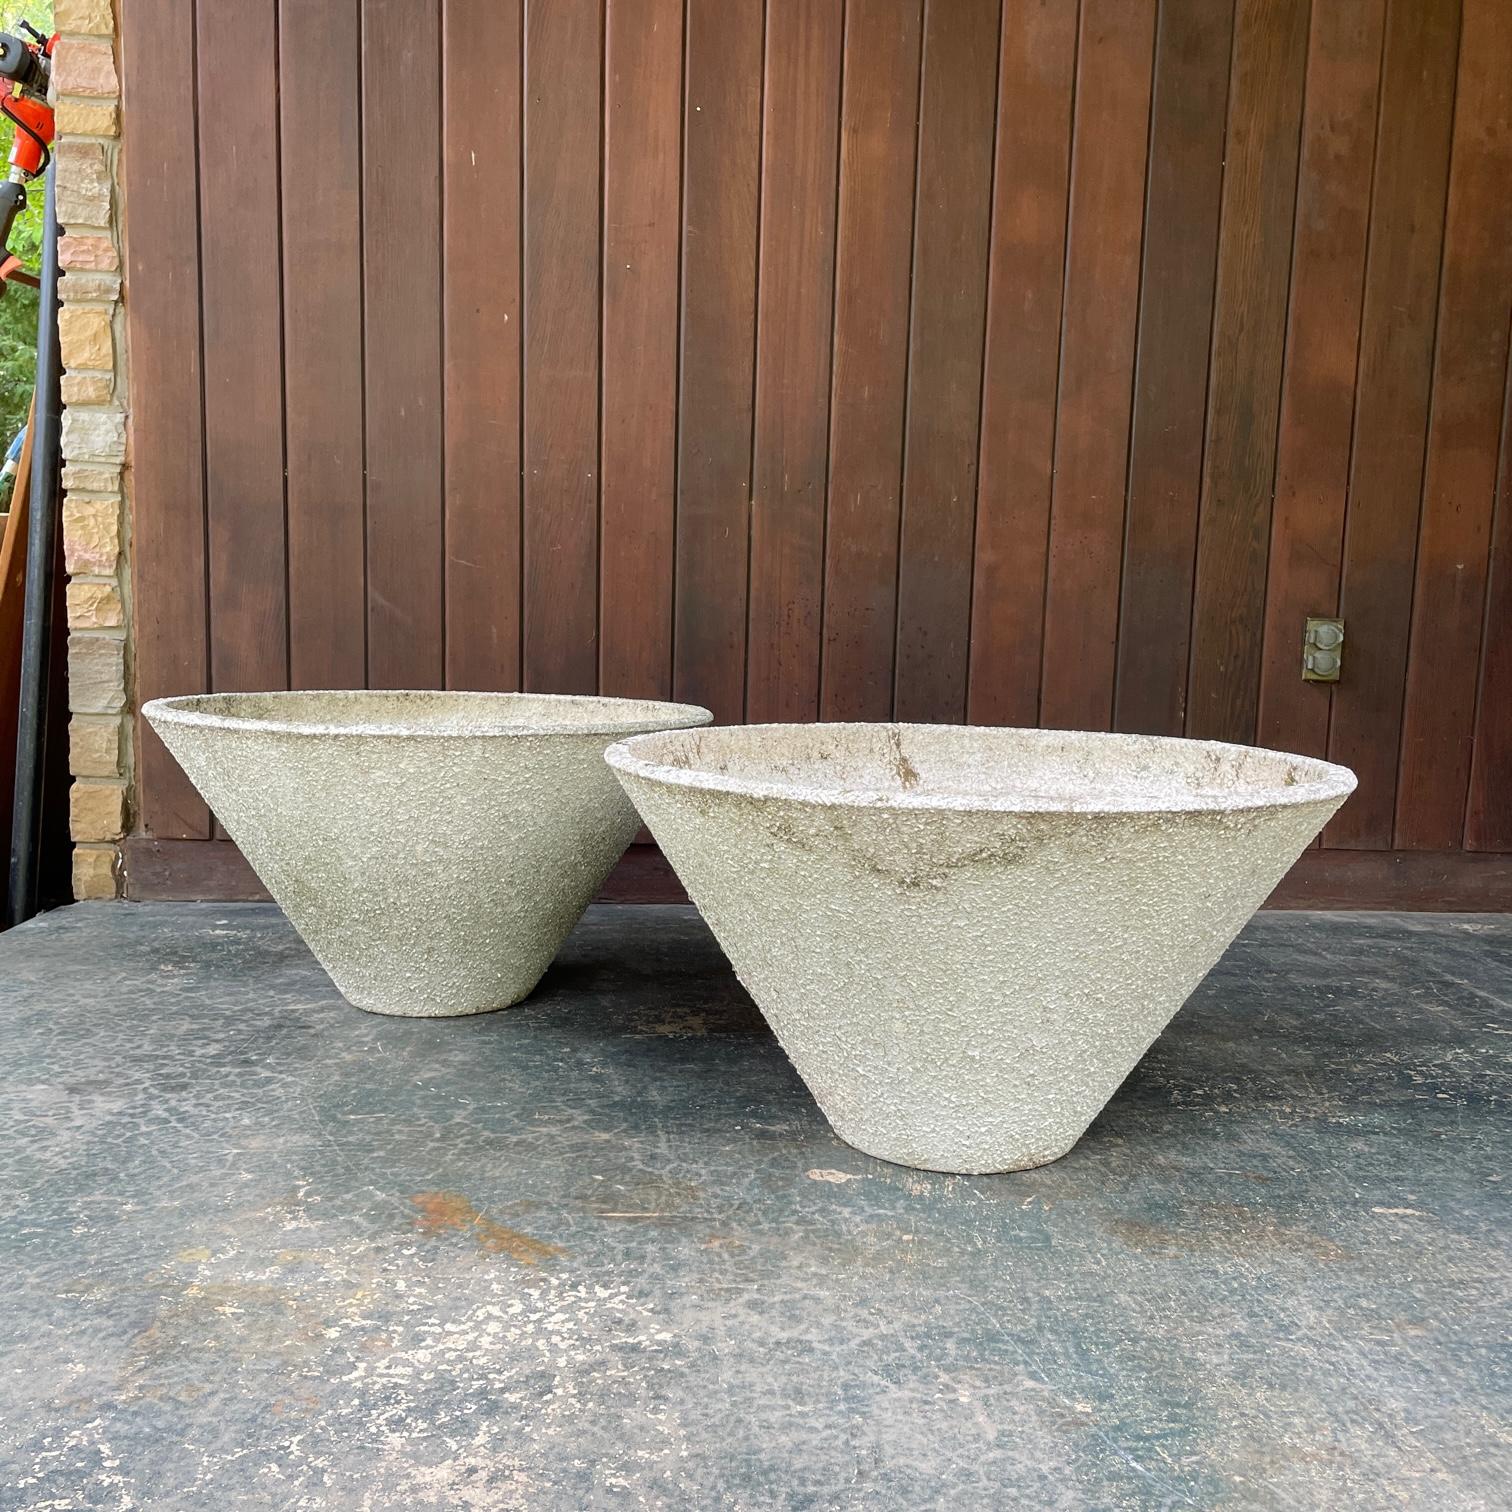 These are quite massive and beautiful pair of conical entrance planters.  26 lbs. each. No markings found. Each pot has two drain holes. And each pot has a semi flaky textural painted surface on the cement, not sure if this is original.  

Dia 30 x